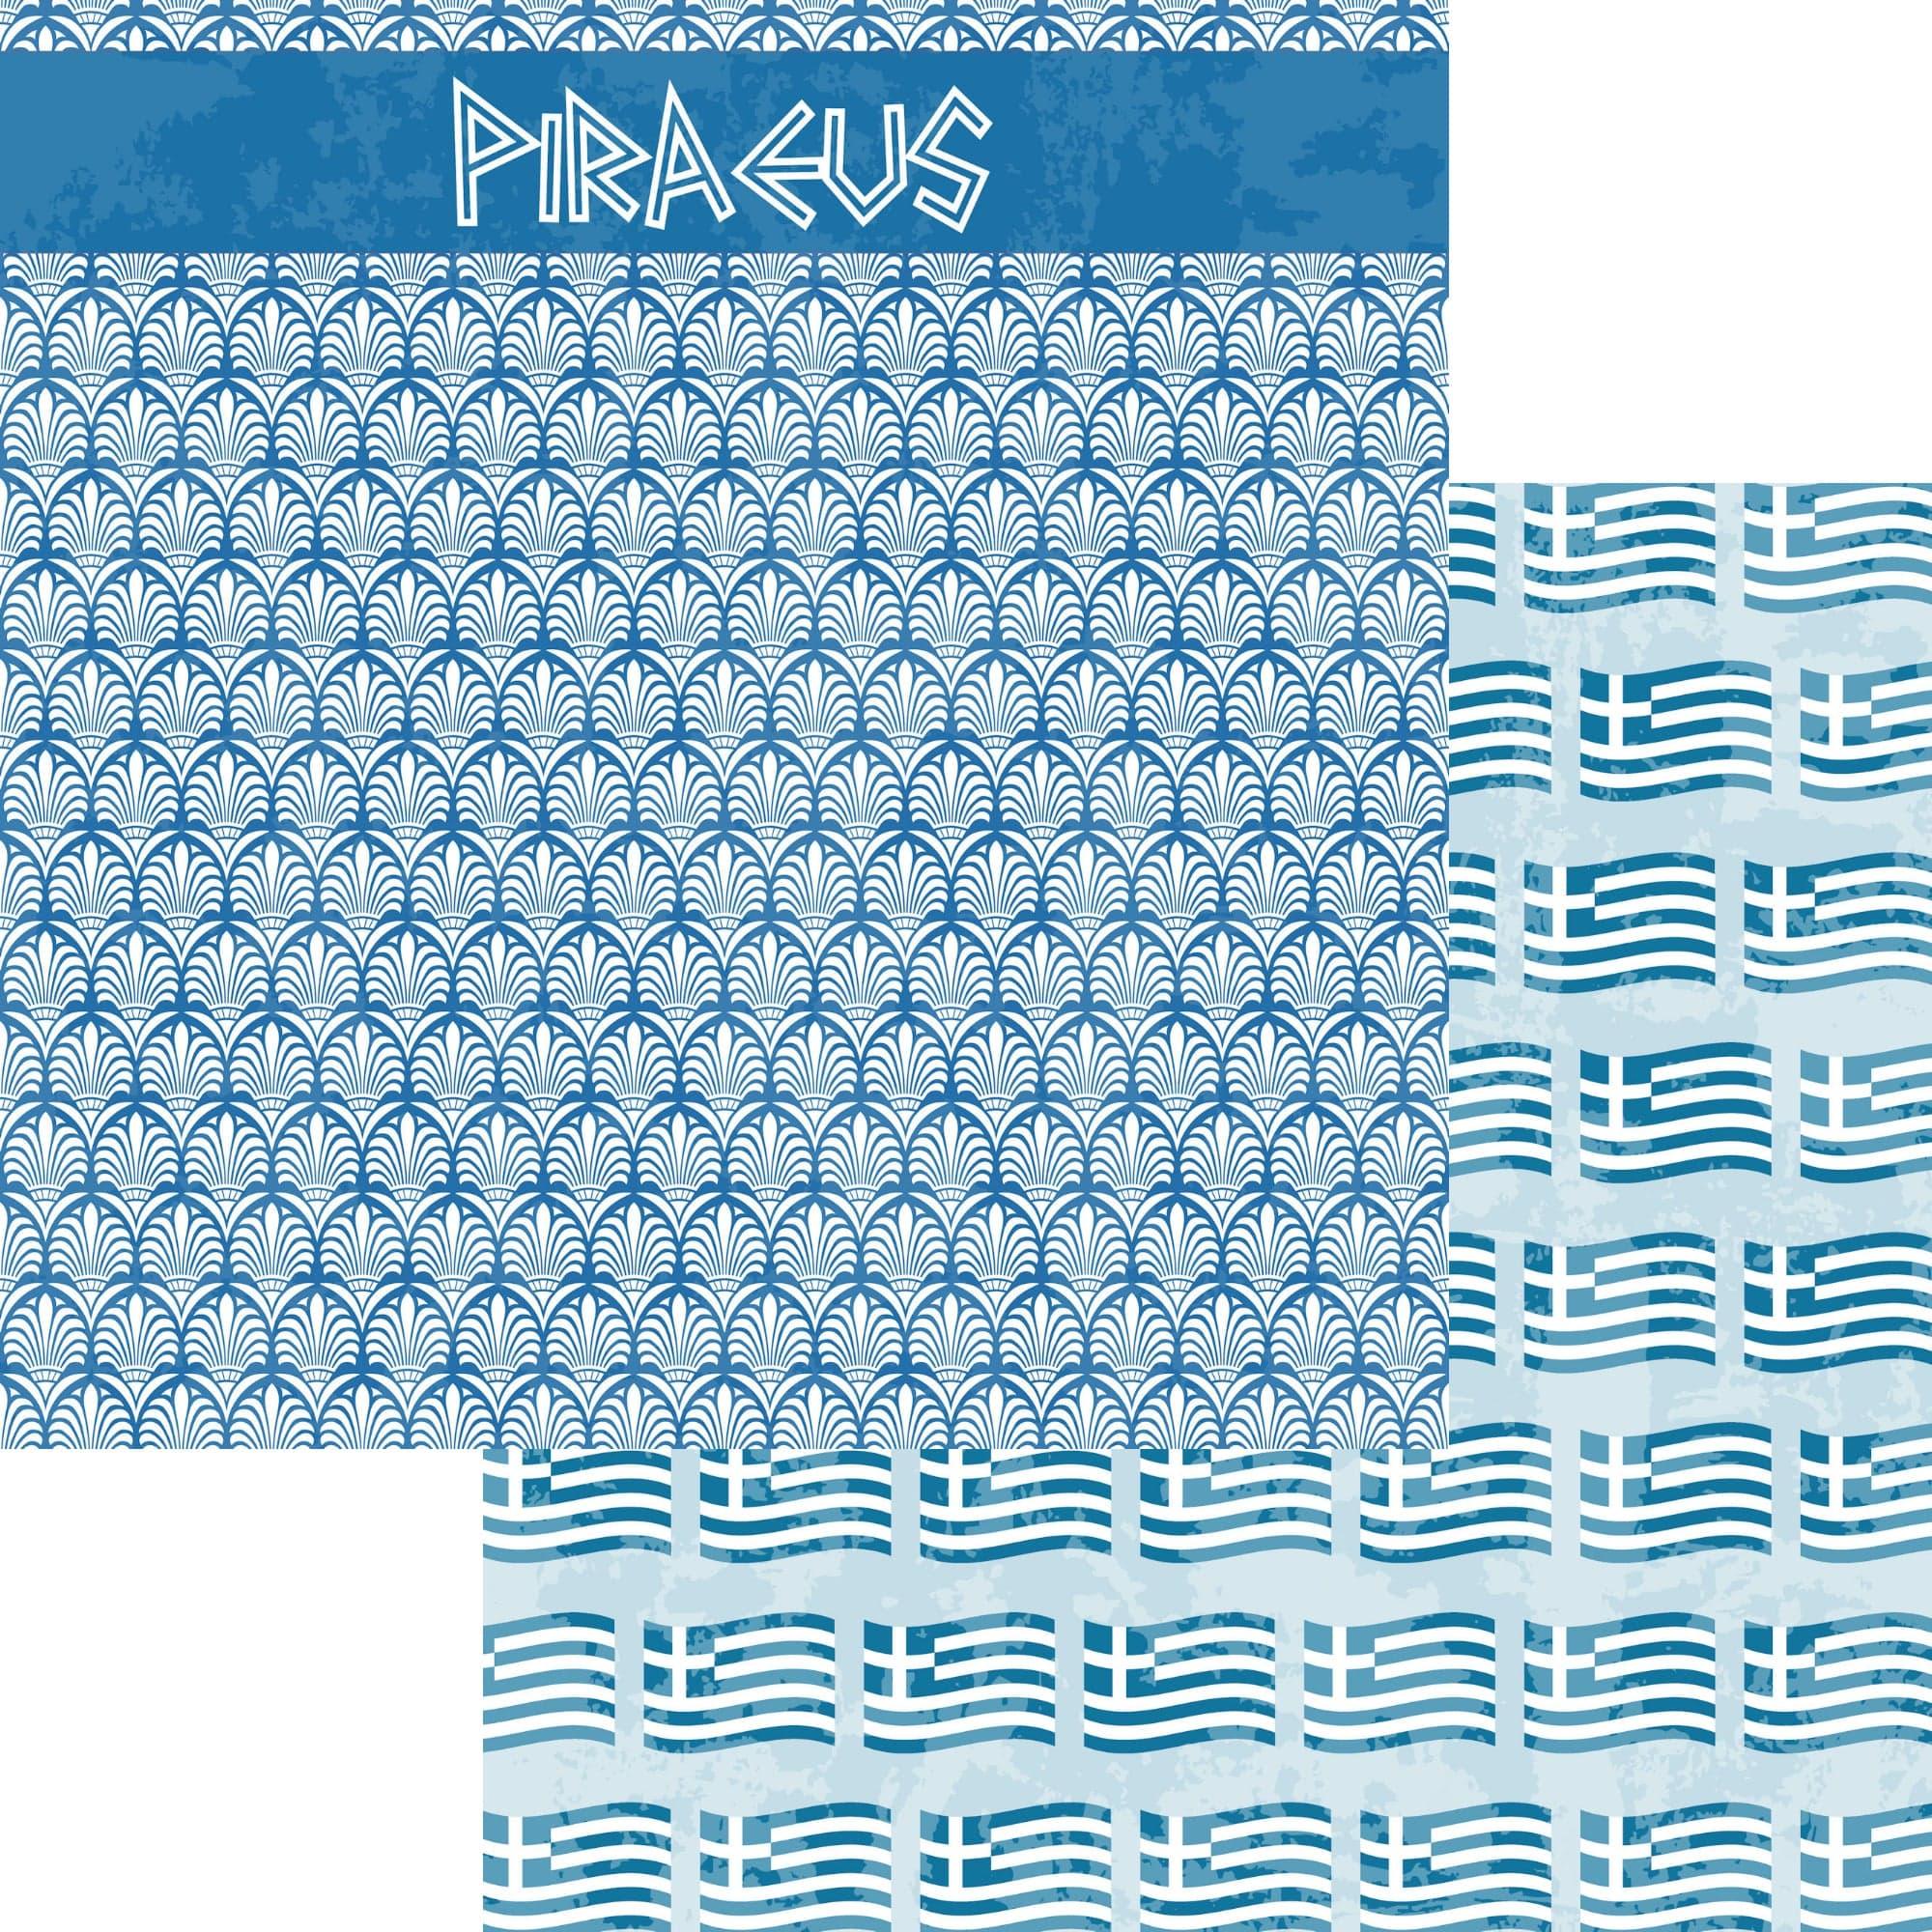 Greece Collection Piraeus 12 x 12 Double-Sided Scrapbook Paper by SSC Designs